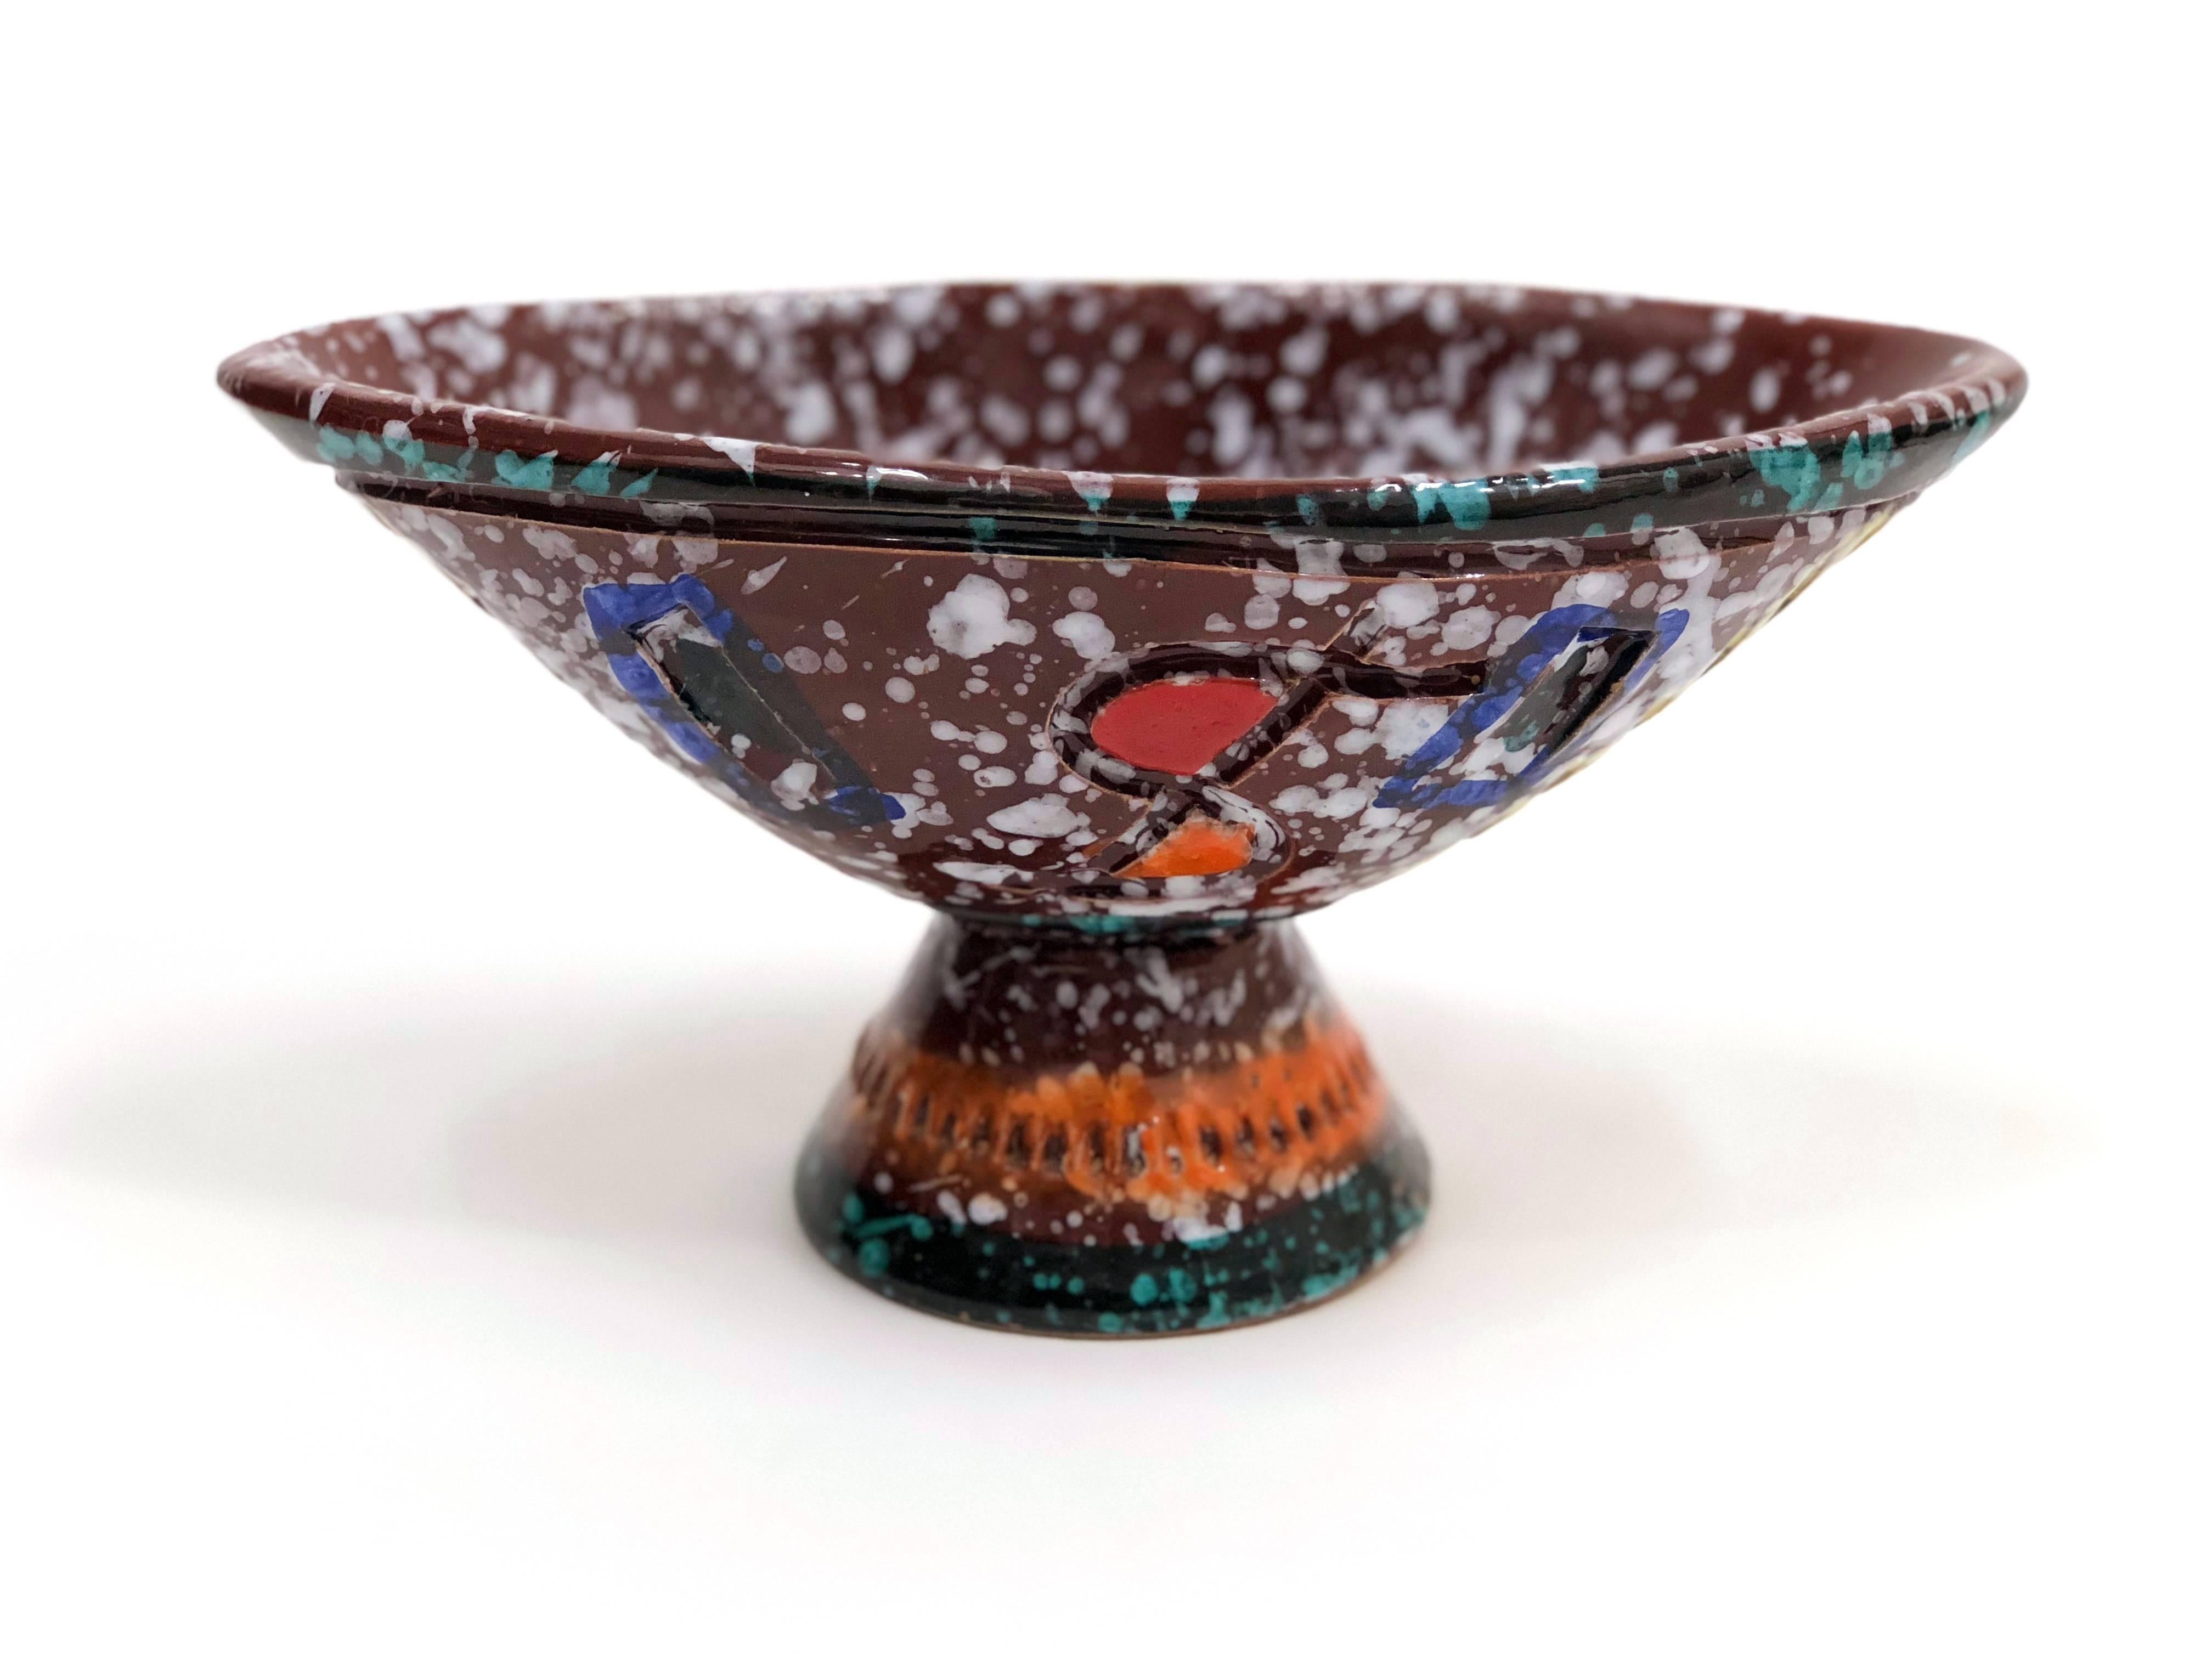 A midcentury brightly-colored and whimsical boat-shaped bowl by Fratelli Fanciullacci, featuring sgrafitto geometric forms and 'spashed' white on red-brown throughout. 

Please note: This bowl ships from Denver, Colorado.